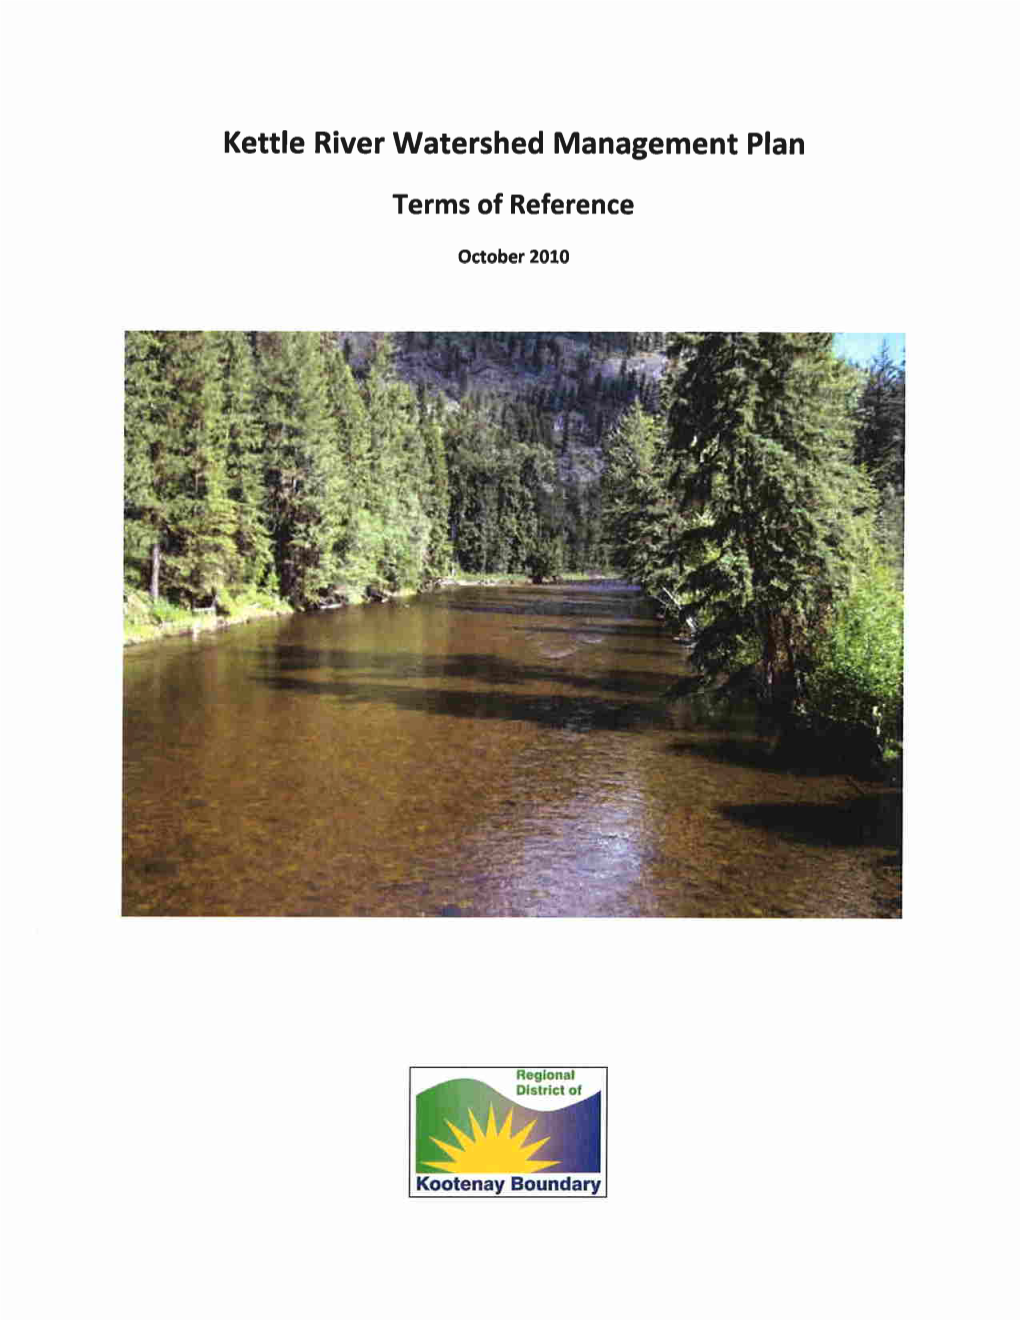 Kettle River Watershed Management Plan Terms of Reference